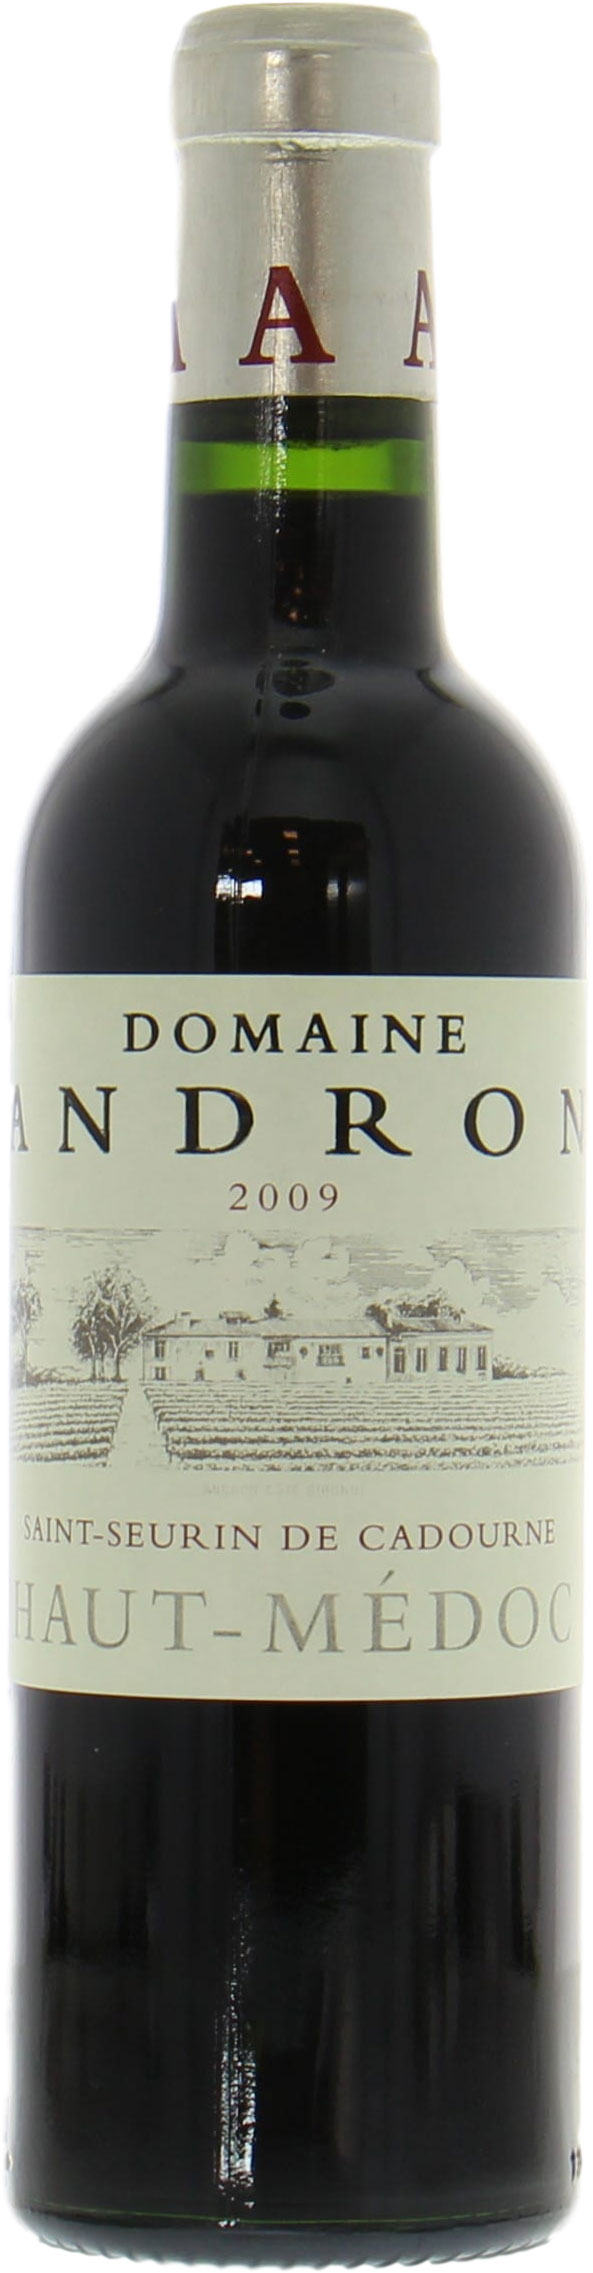 Domaine Andron - Domaine Andron 2009 From Original Wooden Case